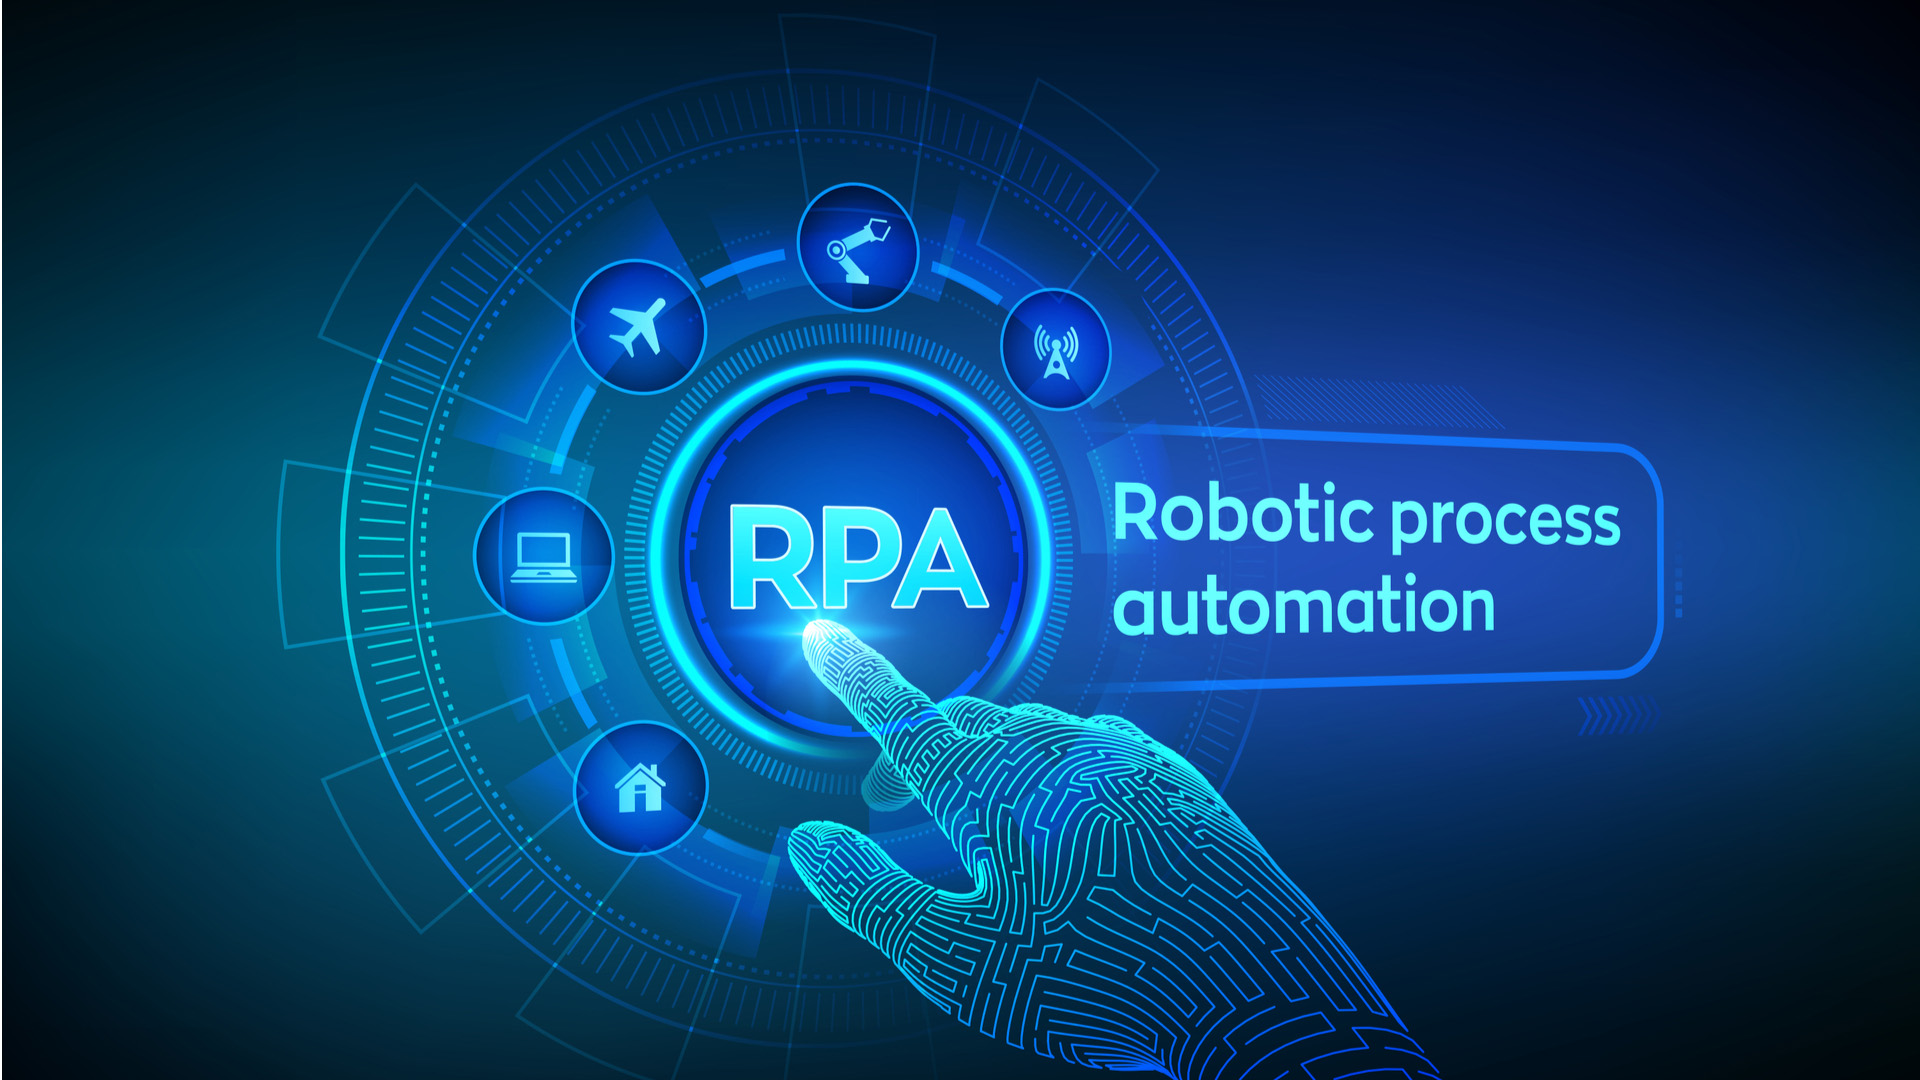 RPA Engineering | The Power of Applied Intelligence